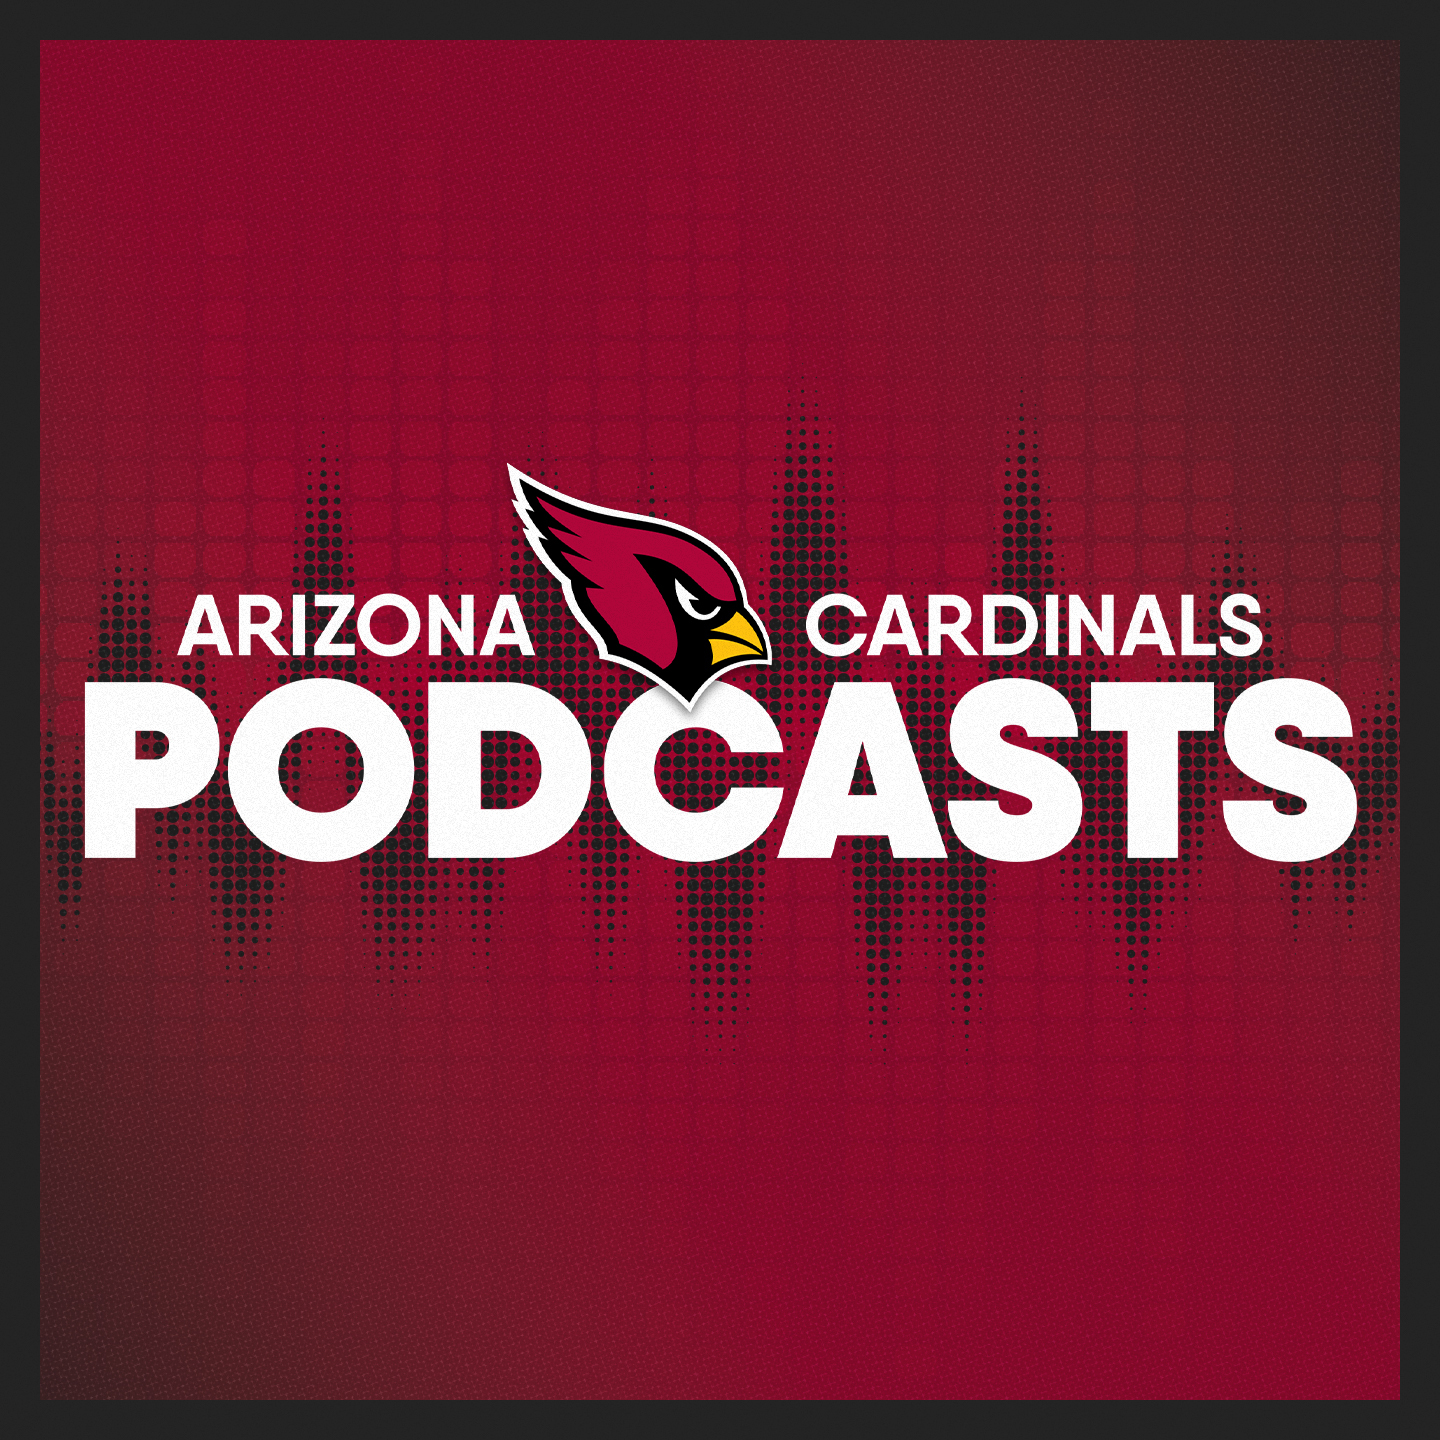 Cardinals Cover 2 - NFL’s Oldest Rivalry Renewed